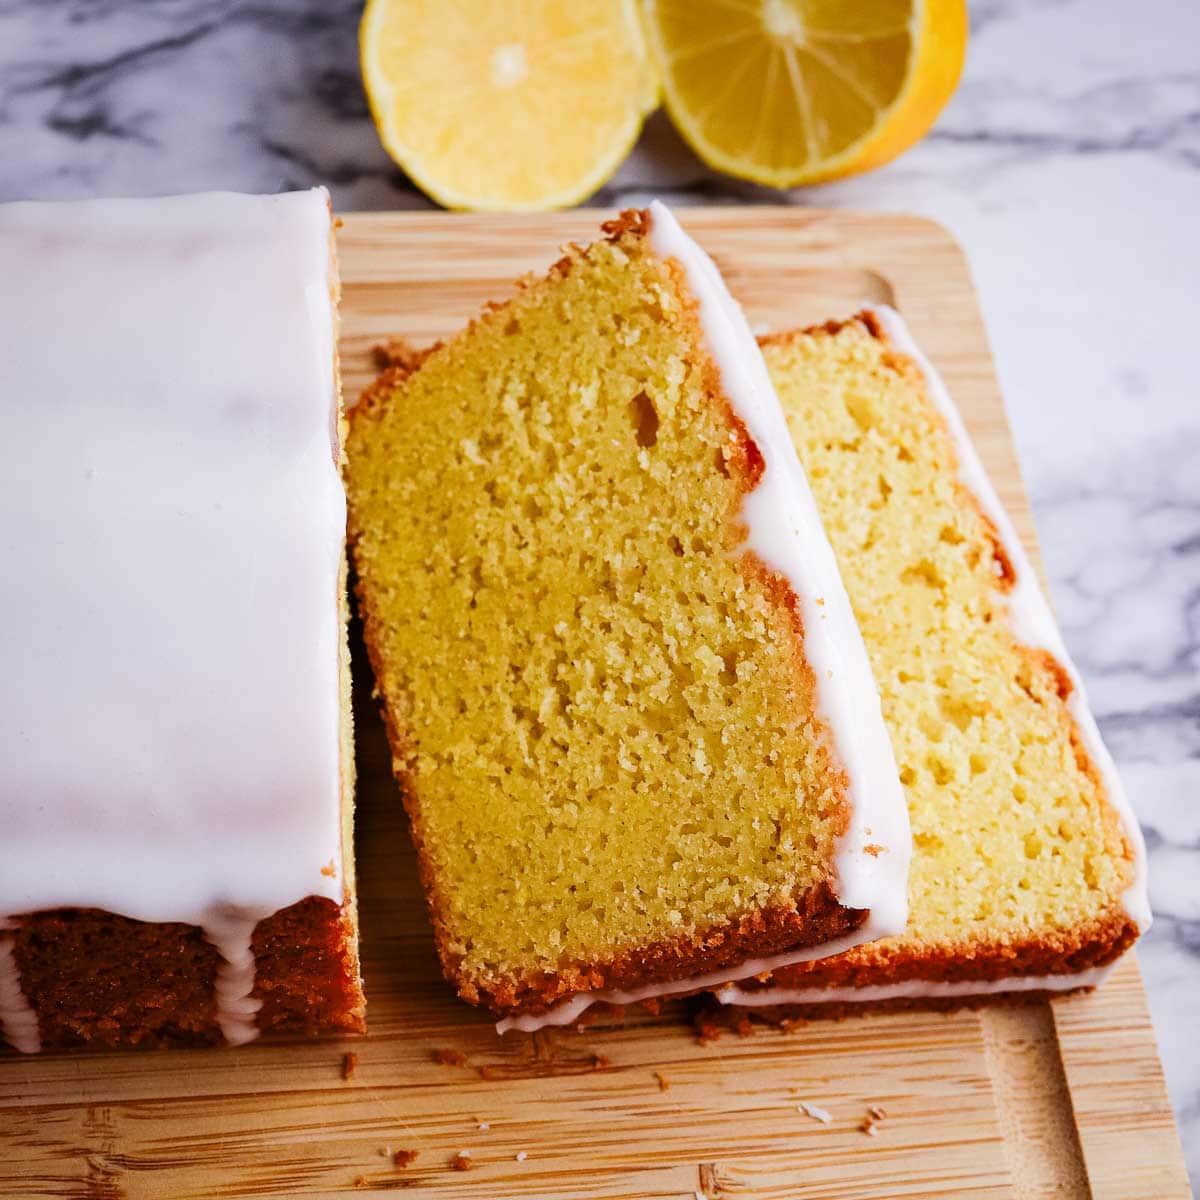 A lemon loaf cake with glaze on a wooden board with sliced lemons in the background.